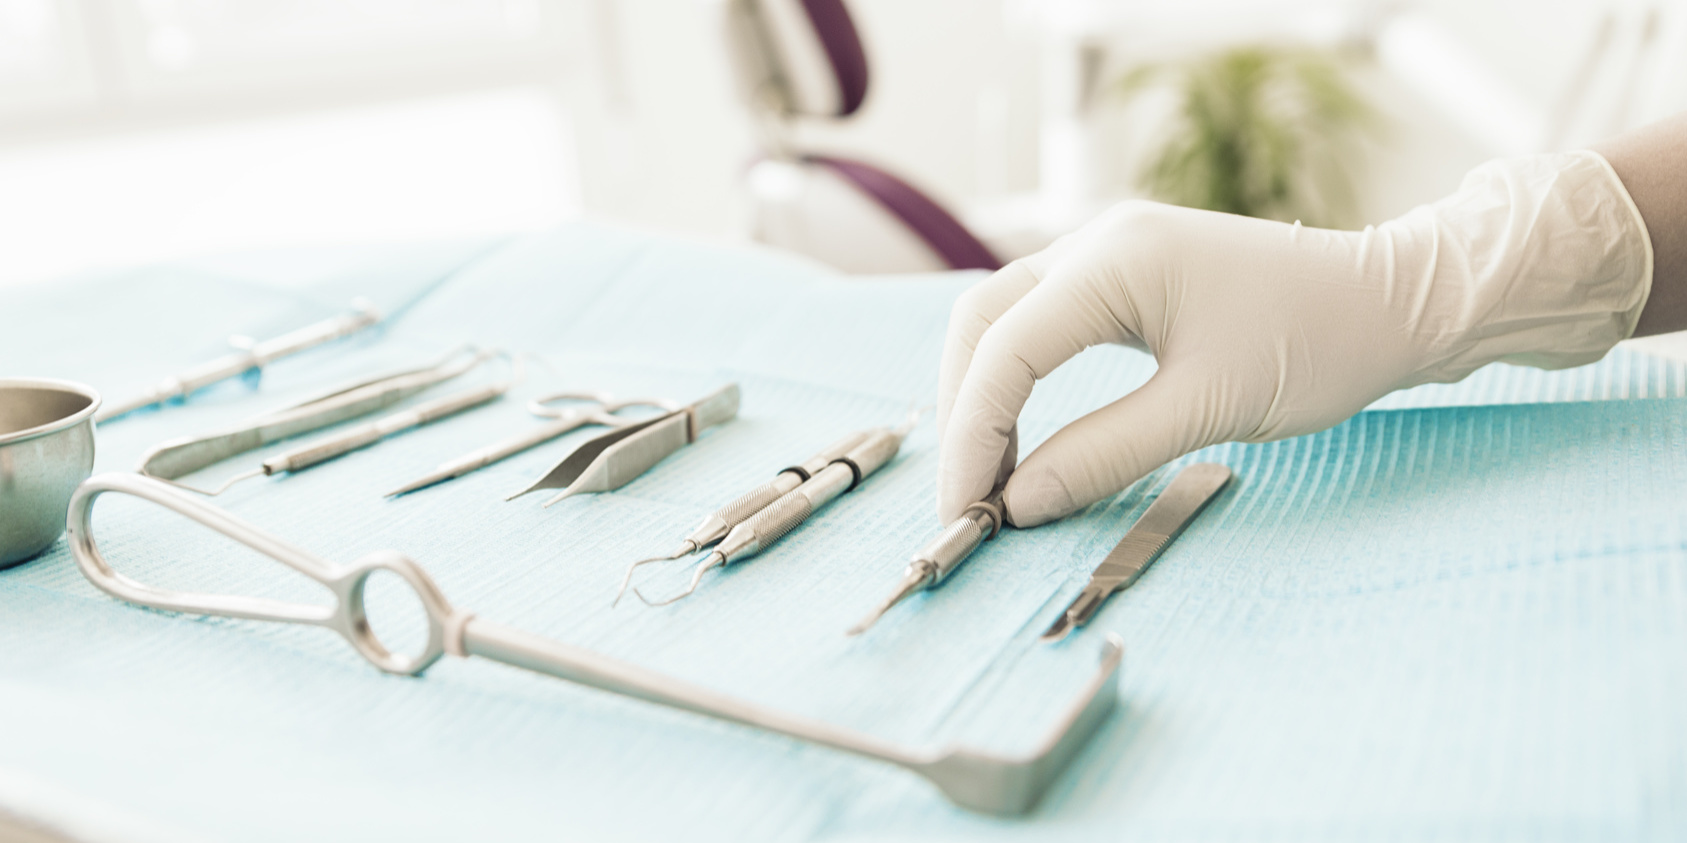 Detail of hand holding dental tools in dental clinic. Dentist Concept.